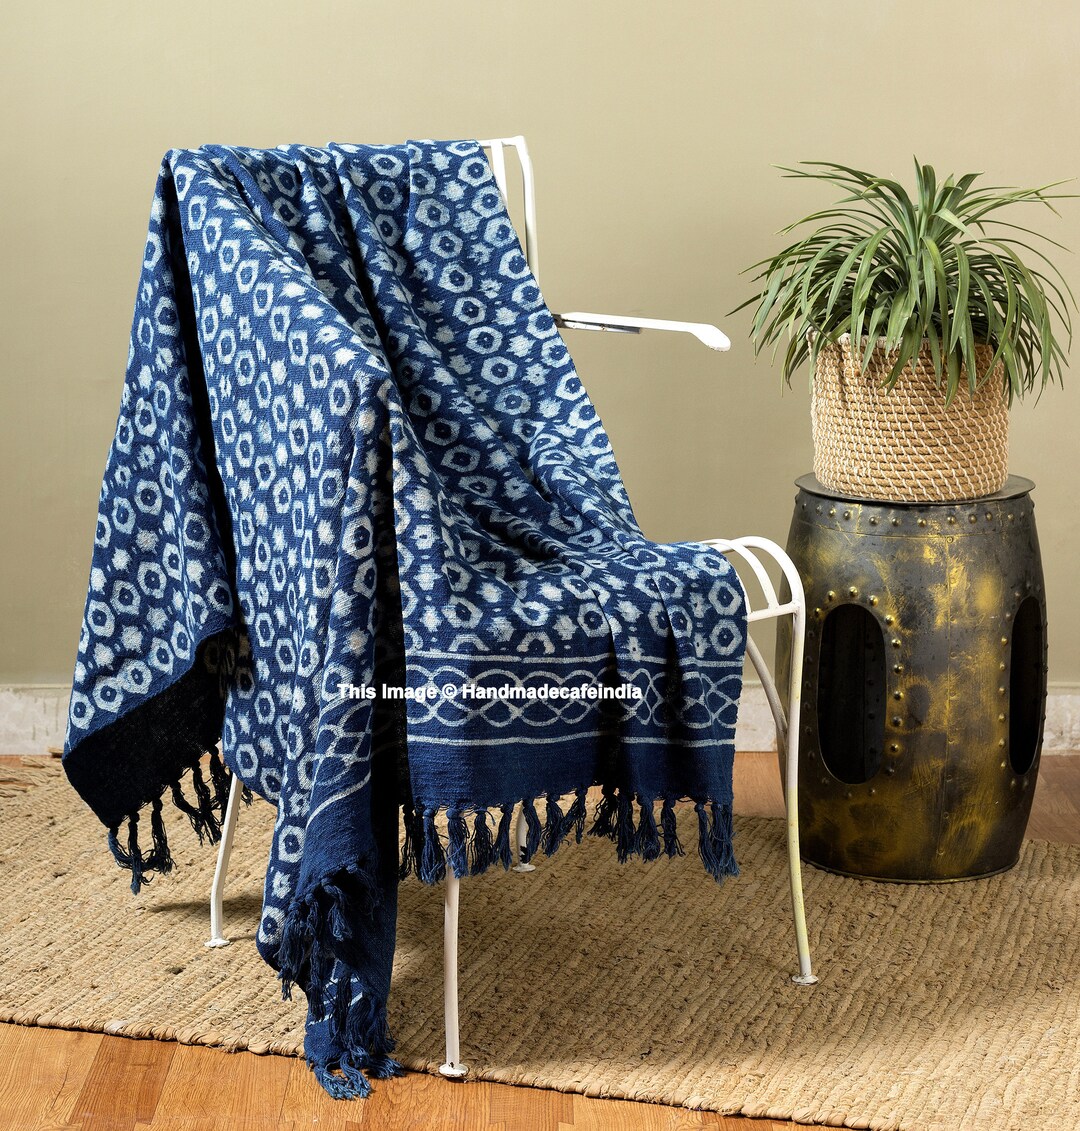 Indigo Blue and White Mudcloth Throw Blanket With Tassels Ikat - Etsy